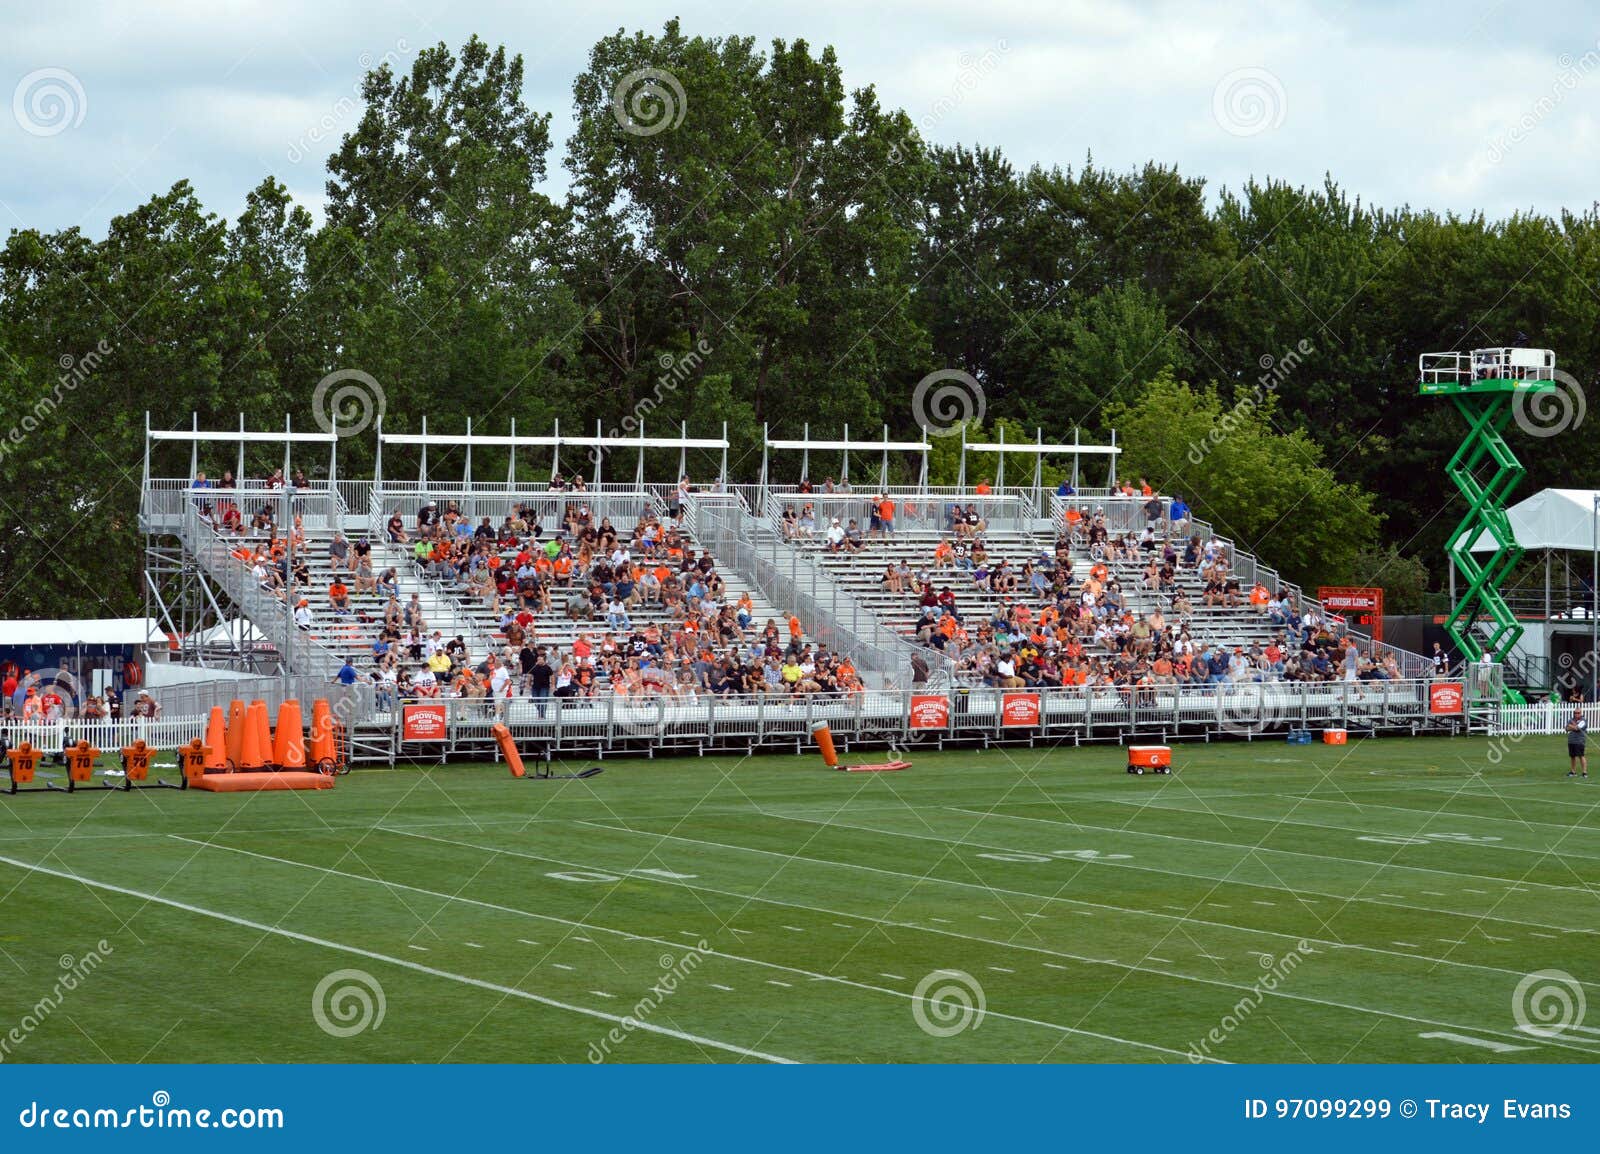 Cleveland Browns Training Camp Seating Chart